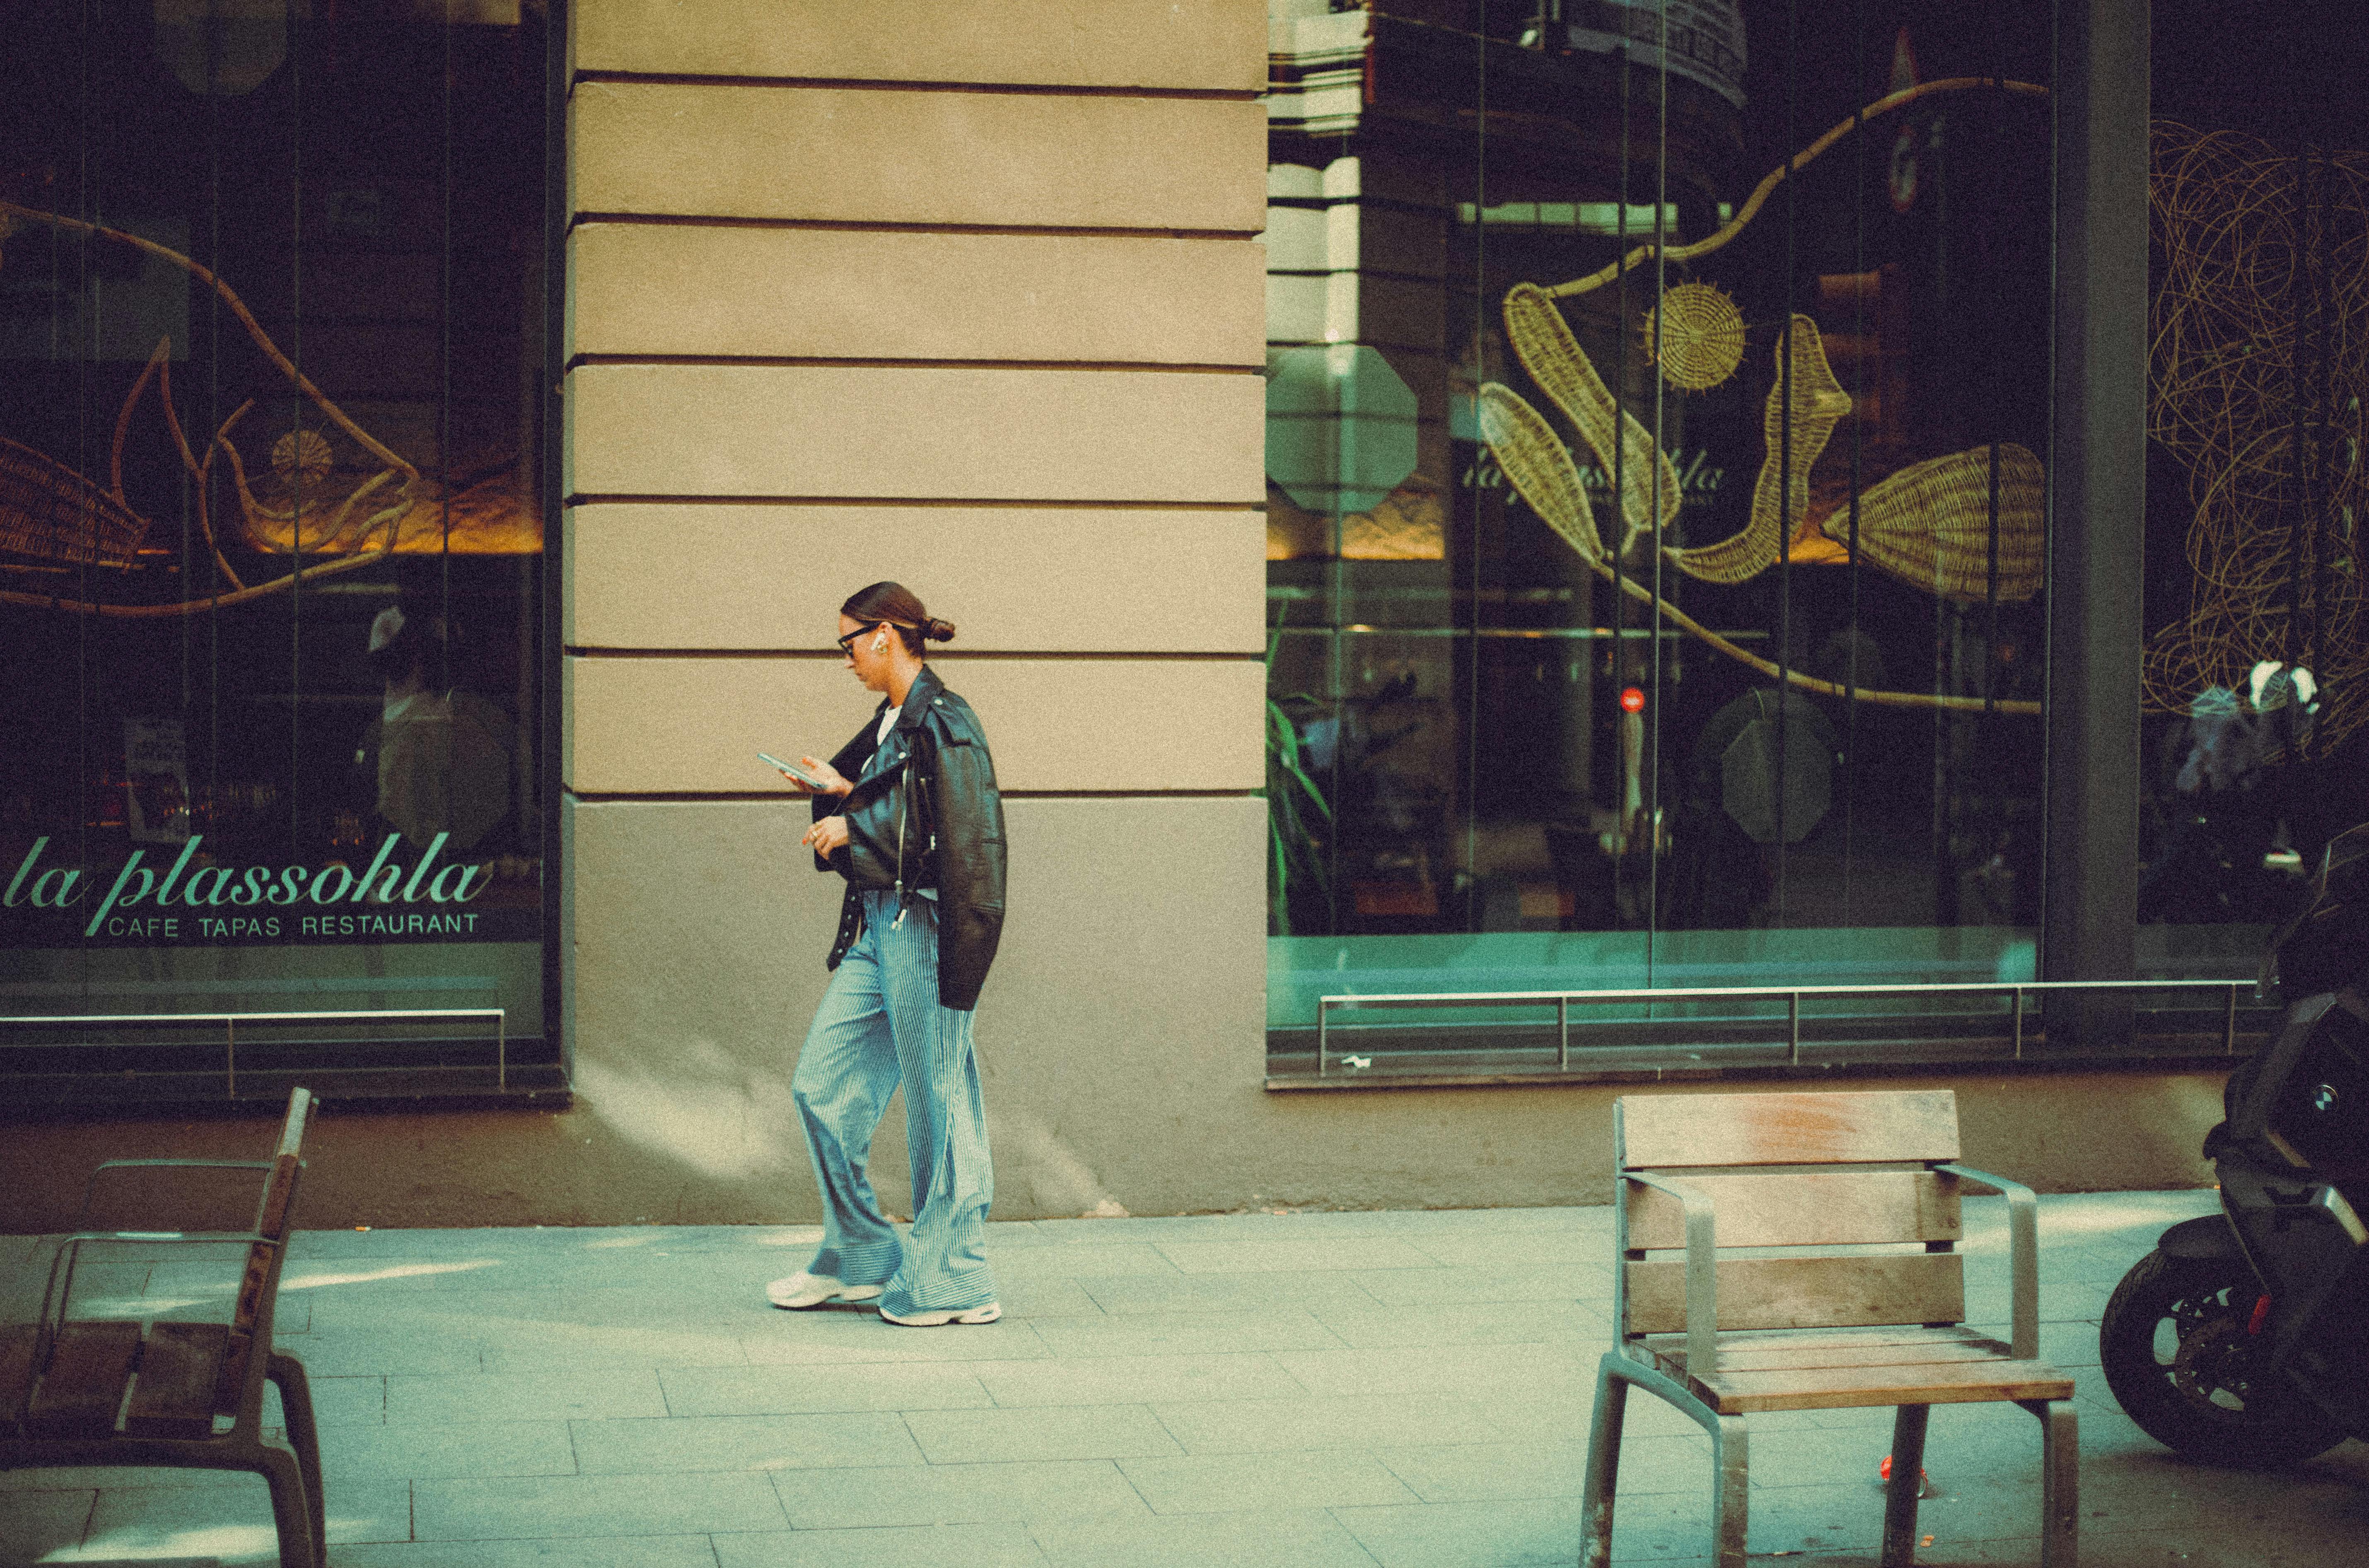 A woman walking in front of a restaurant | Source: Pexels